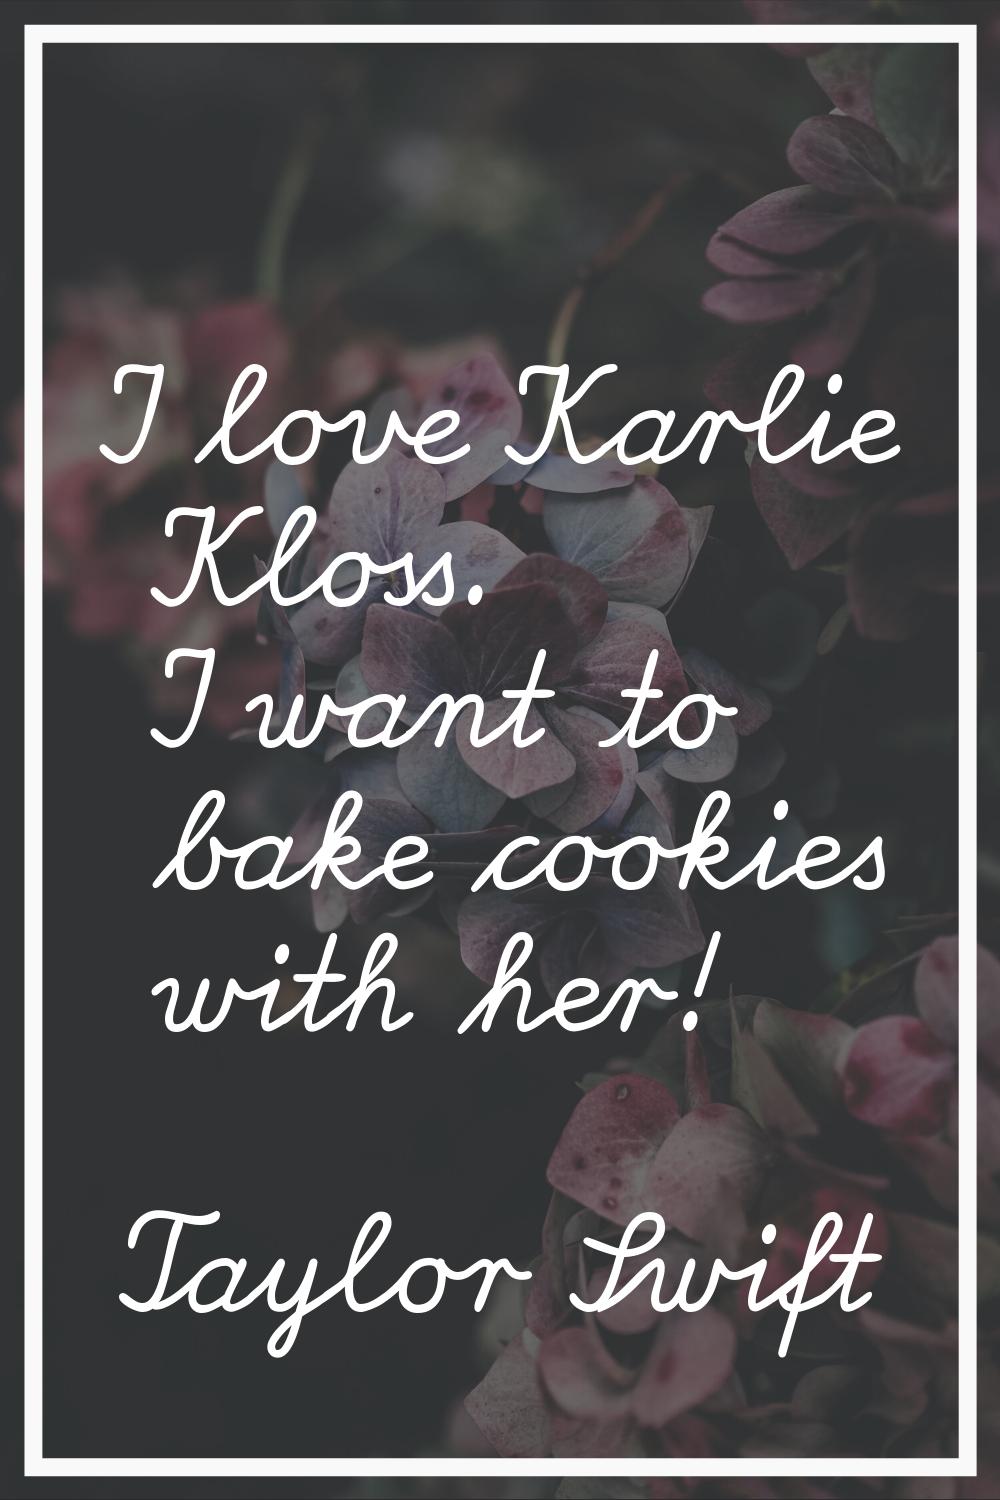 I love Karlie Kloss. I want to bake cookies with her!